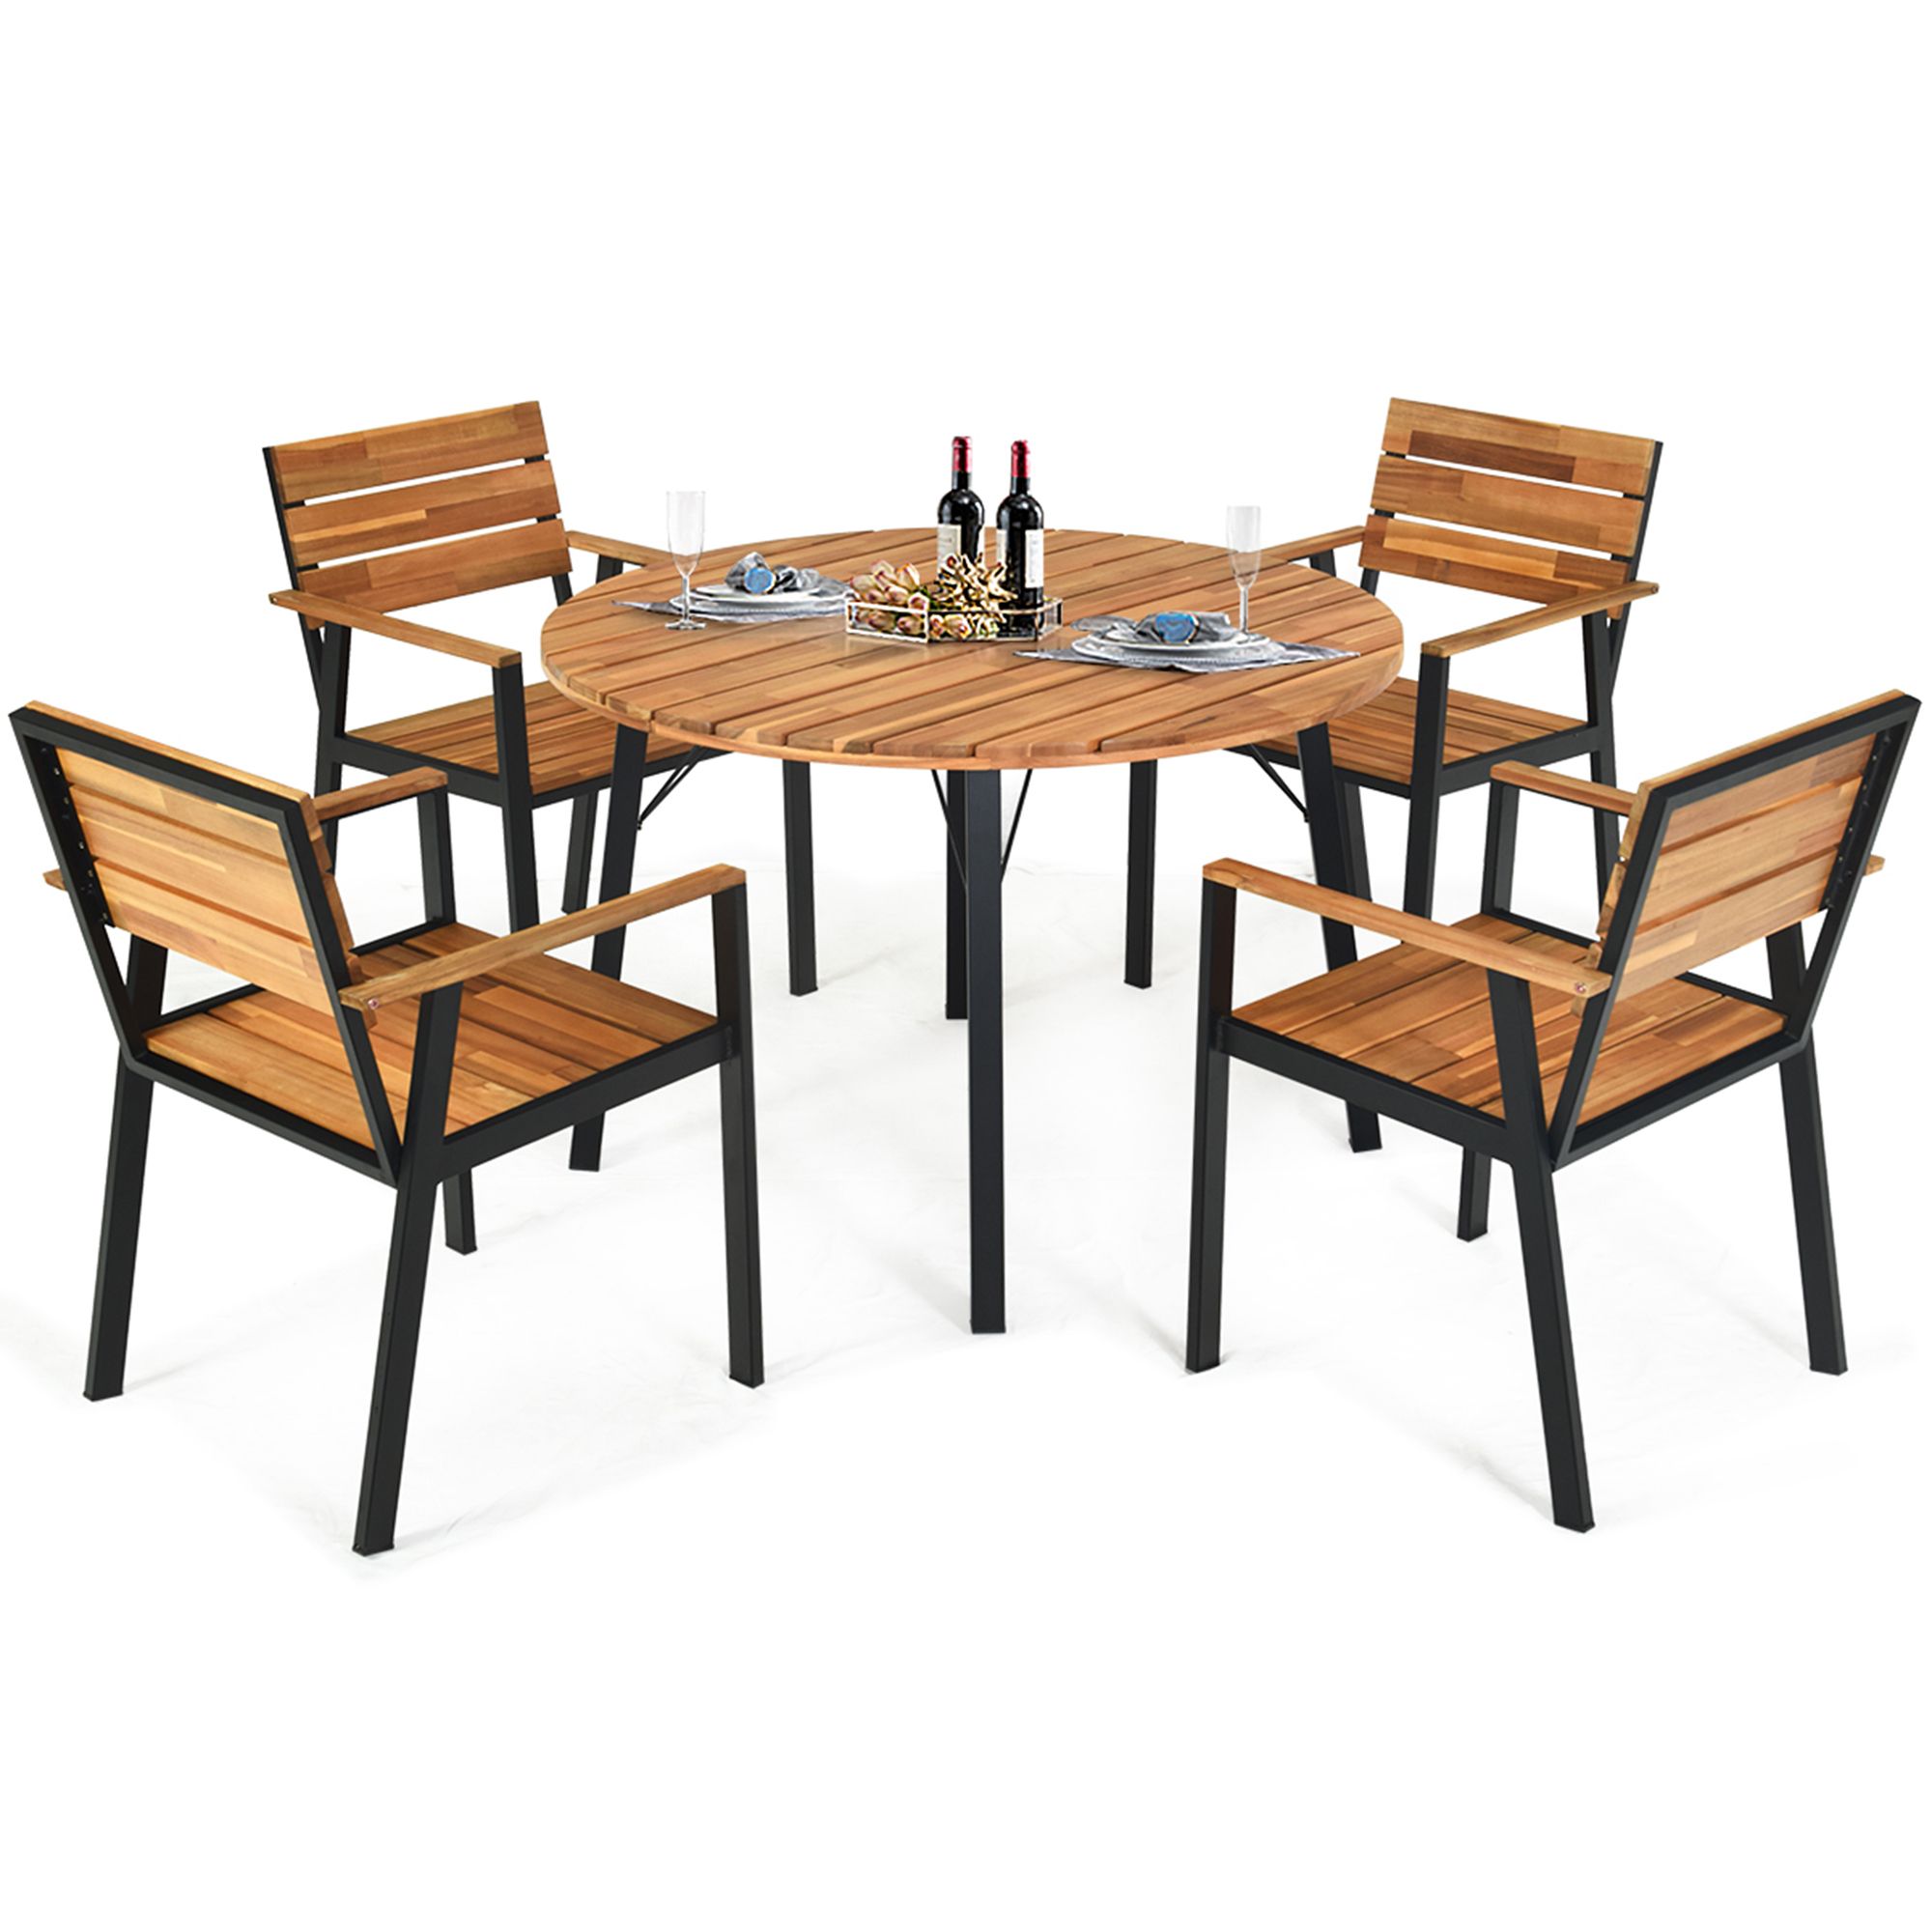 Acacia Wood Outdoor Seating Patio Sets In Most Recently Released 5 Piece Patio Acacia Wood Dining Set Conversation Chat Chair Table With (View 6 of 15)